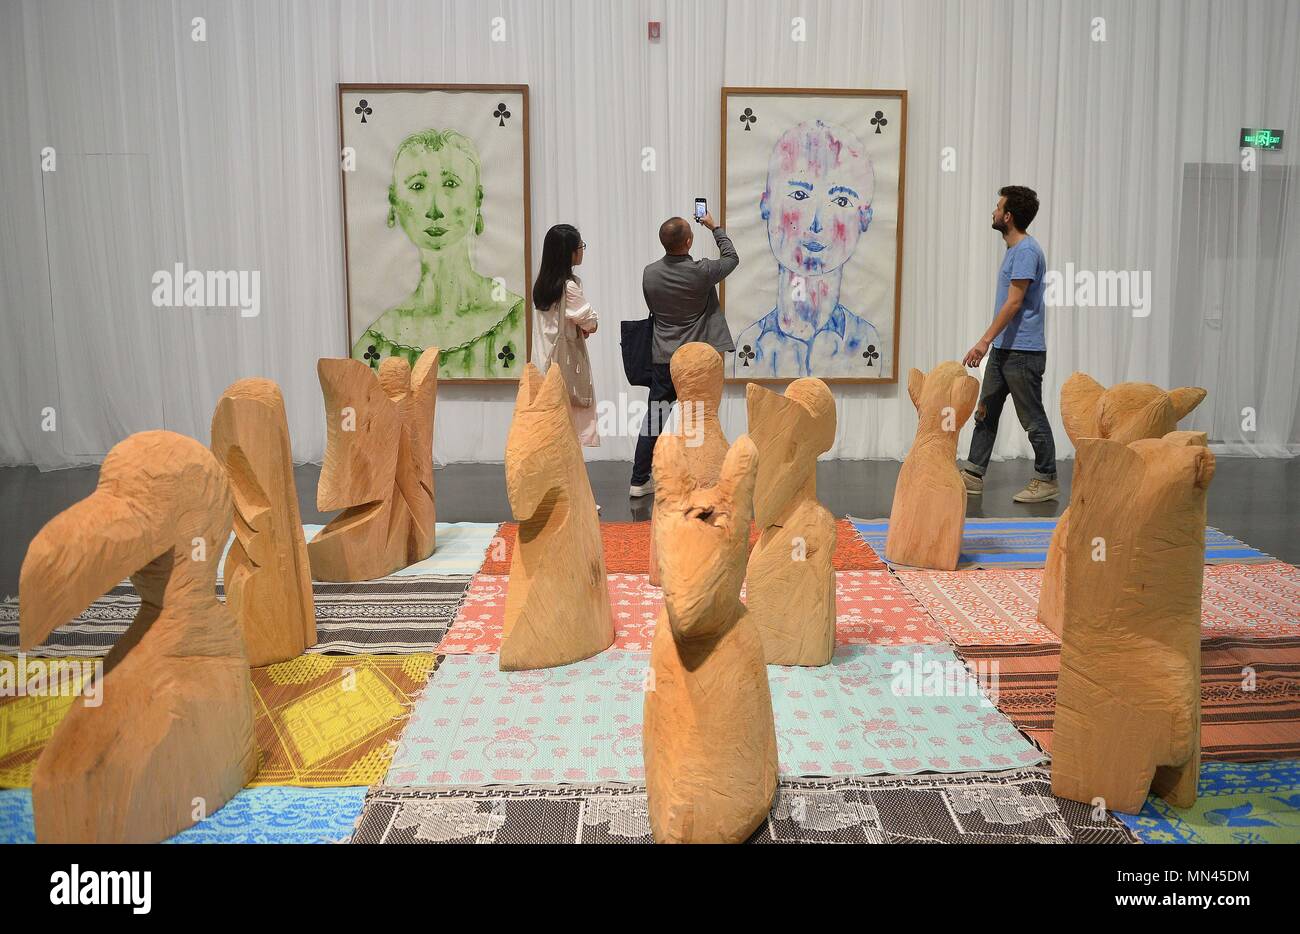 (180514) -- BEIJING, May 14, 2018 (Xinhua) -- Visitors view the exhibits during the 'Bridging the Gap: A Selection of Nominees of the Marcel Duchamp Prize' exhibition at Tsinghua University Art Museum in Beijing, capital of China, May 14, 2018. The exhibition, exhibiting the works of 10 artists selected for the Marcel Duchamp Prize, kicked off on Monday. (Xinhua/Xiao Xiao) (zyd) Stock Photo